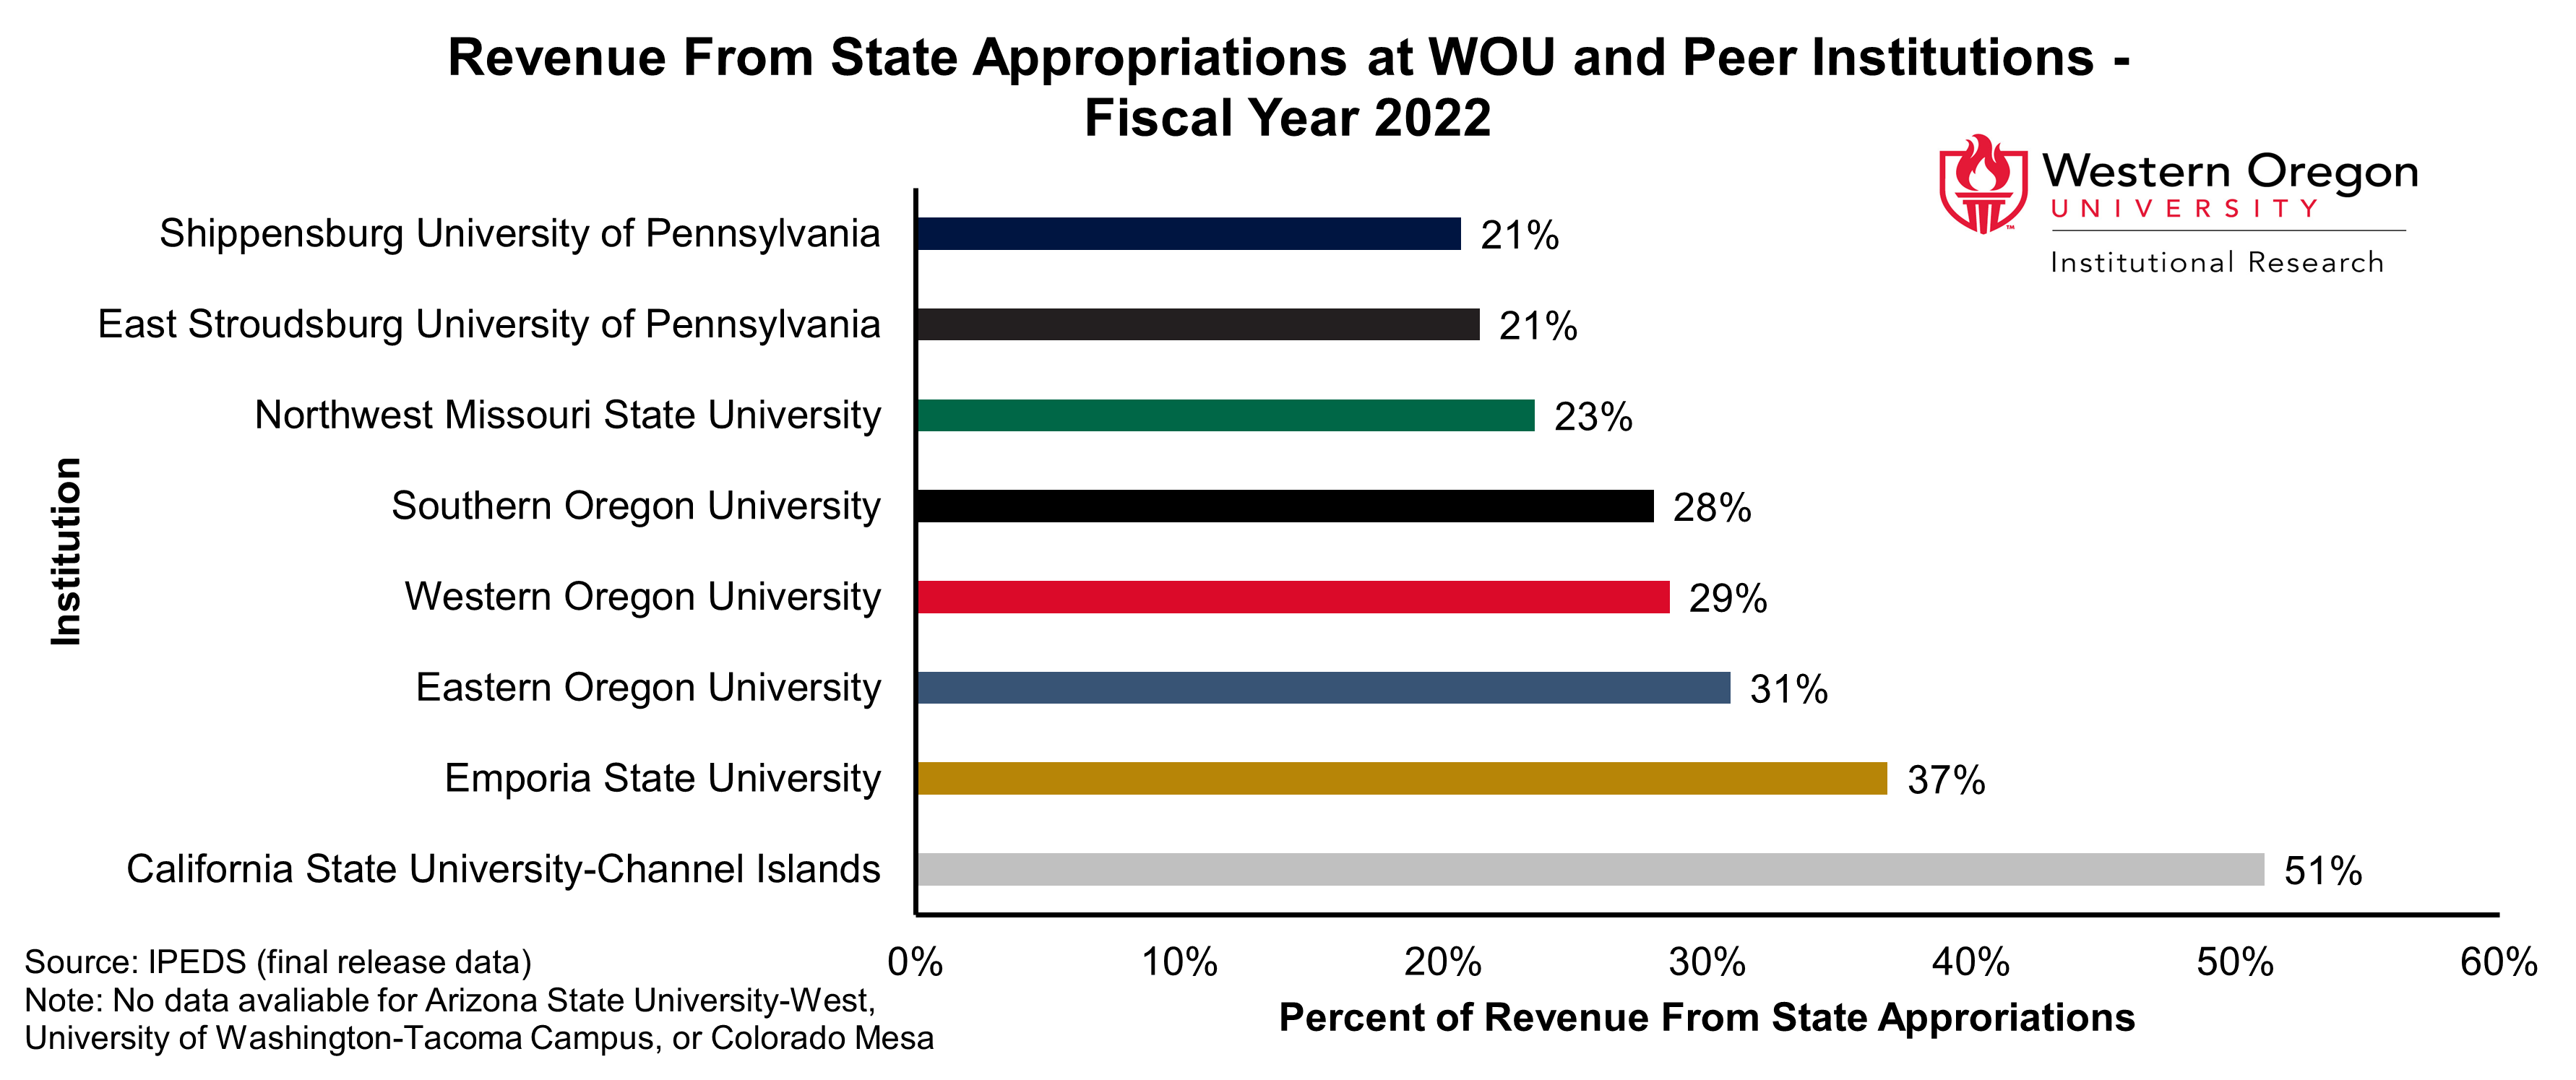 Bar graph of the percentage of revenue from state appropriations for WOU and peer universities in fiscal year 2022, showing percentages that range from 21% to 51% with WOU's percentage falling near the median.